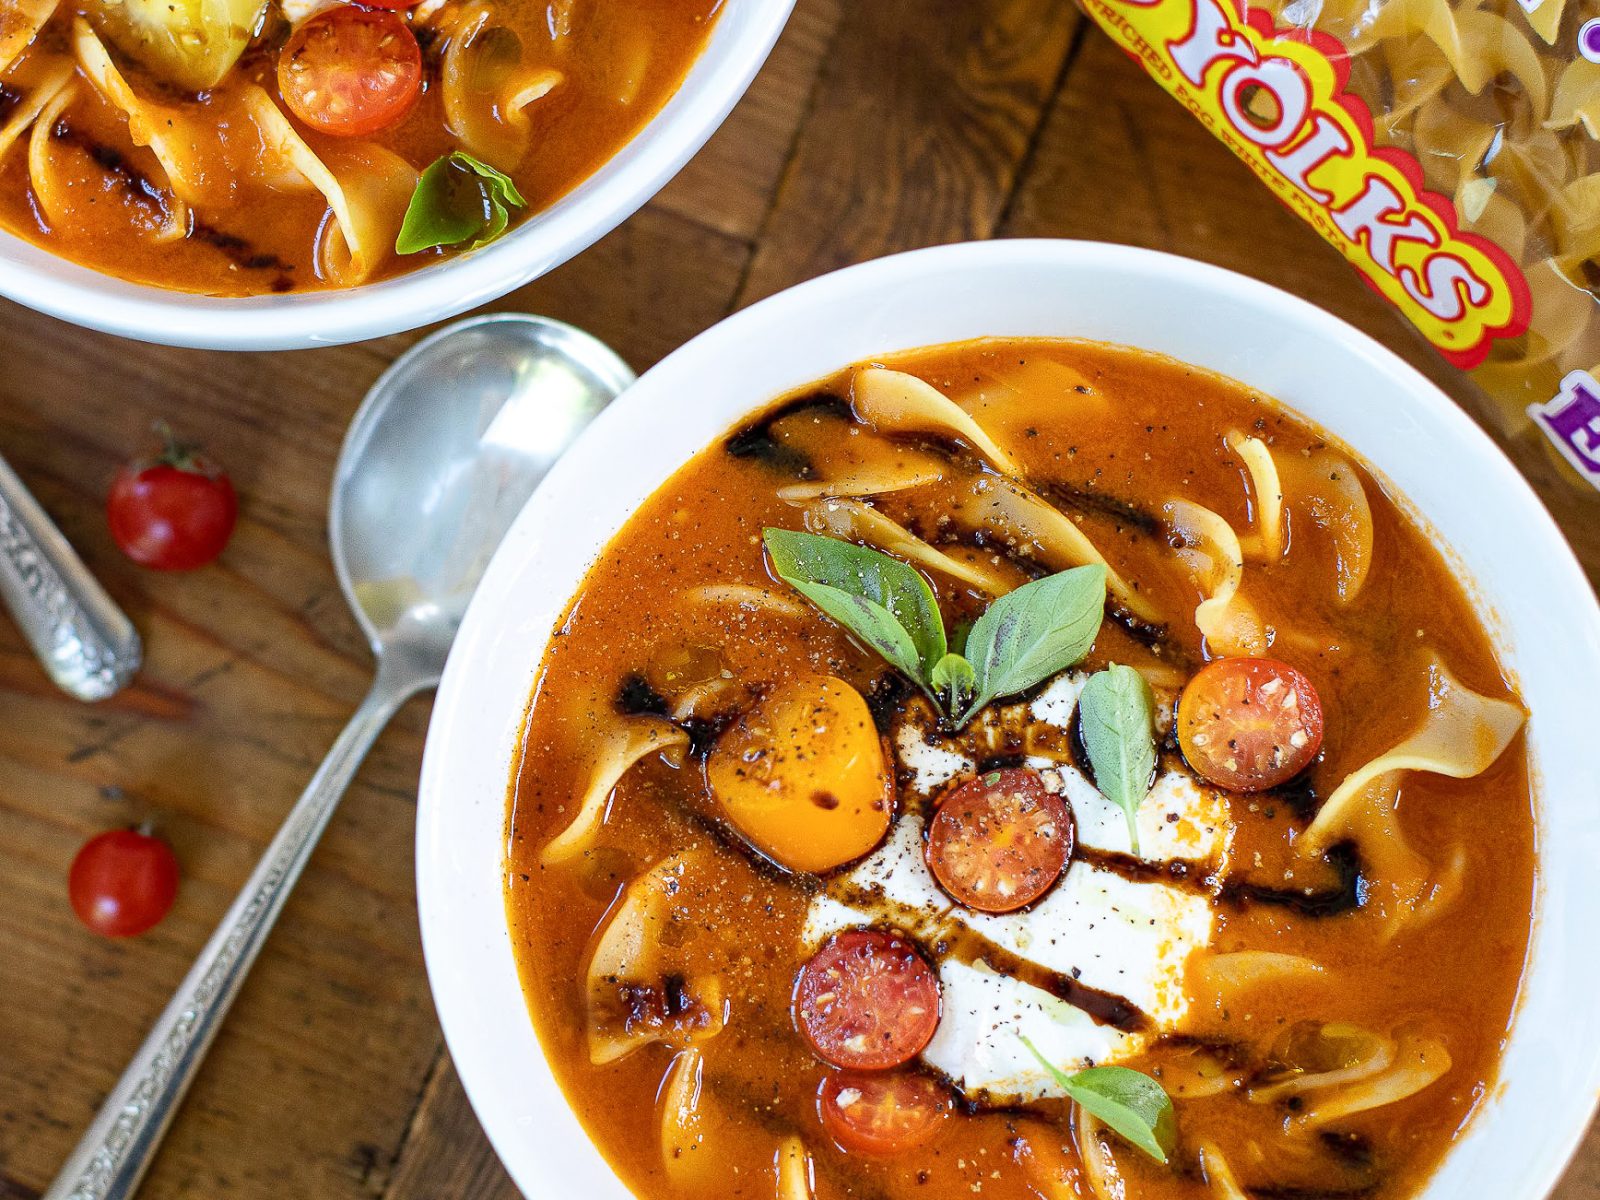 Grab Savings On No Yolks At Publix & Try This Caprese Tomato Noodle Soup